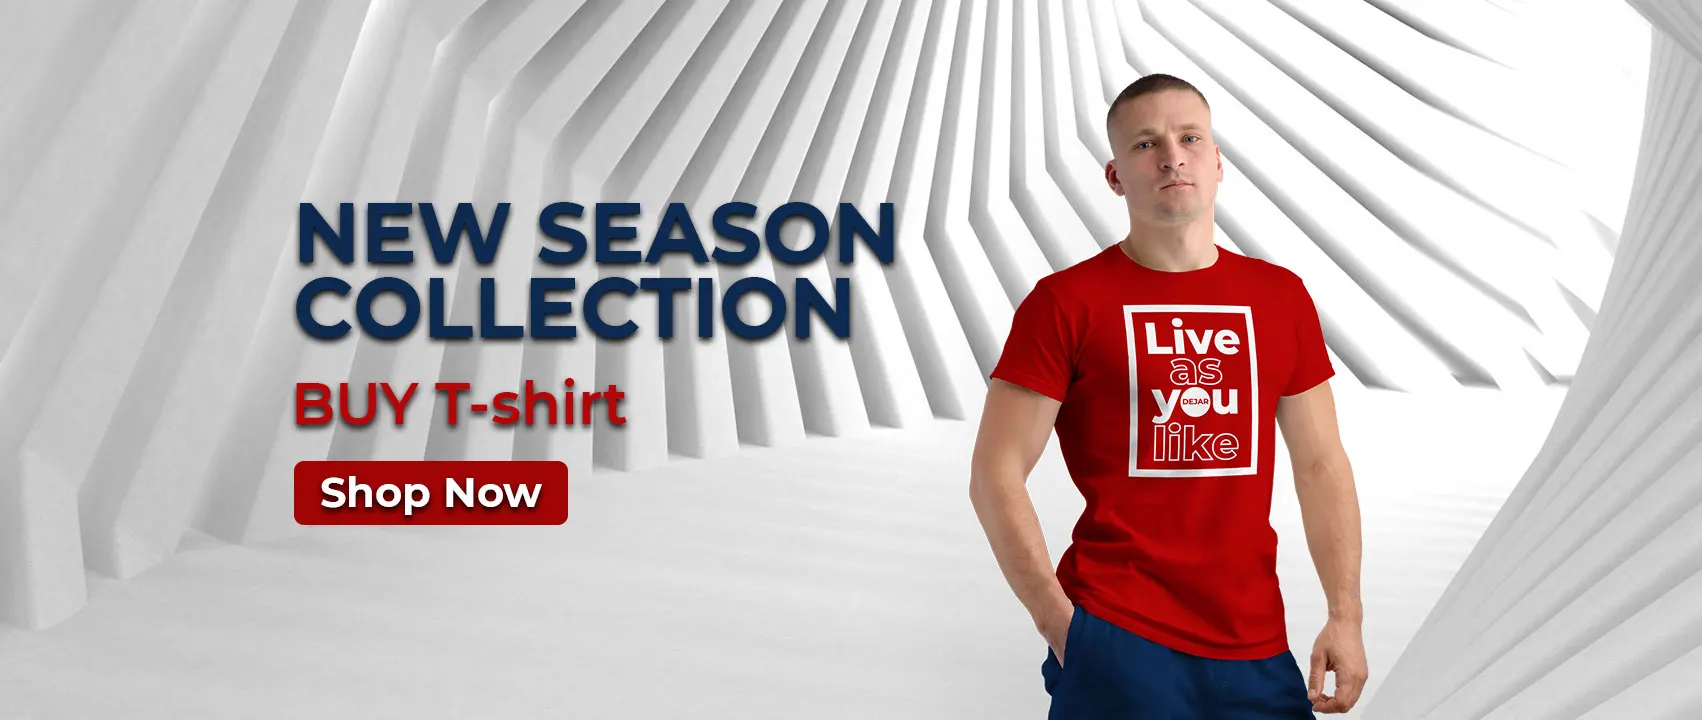 DejarFashion-New-Season-Collection-Buy-T-Shirt-Facebook-Page-Cover